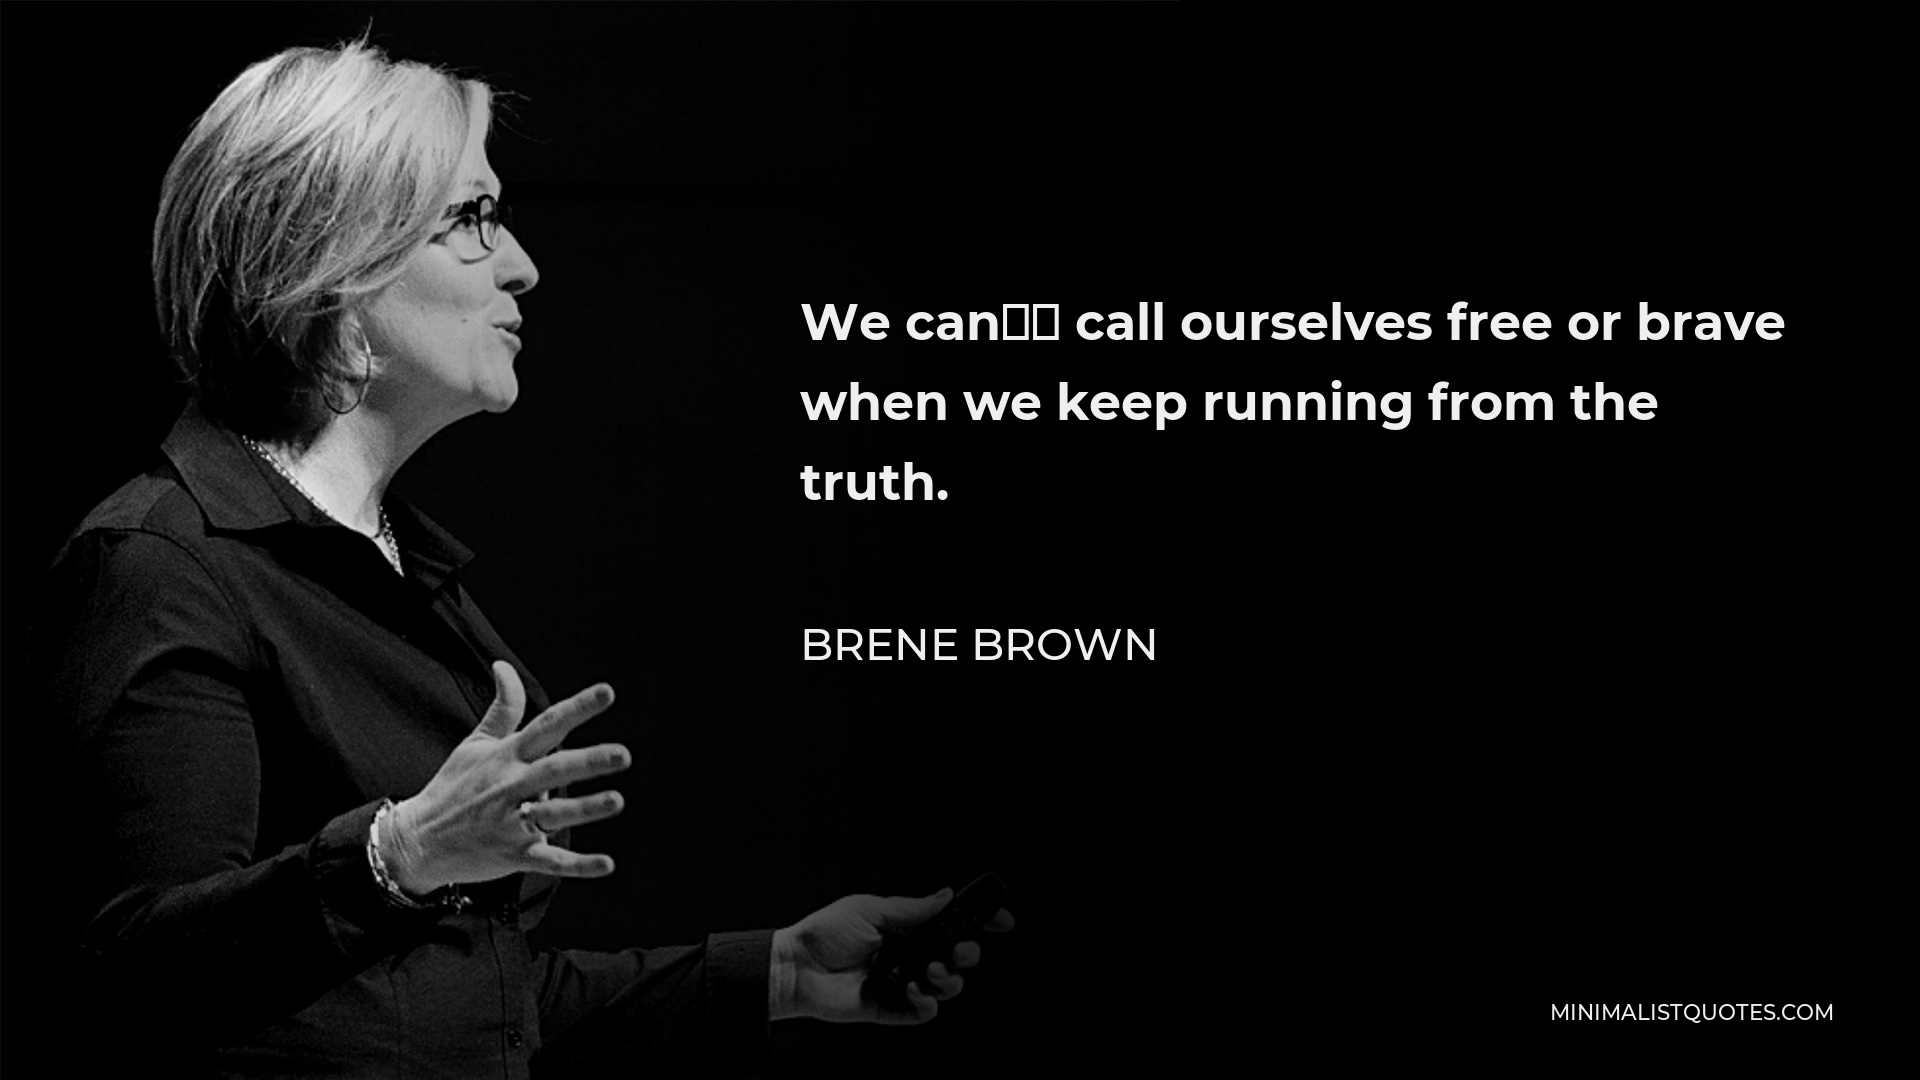 Brene Brown Quote - We can’t call ourselves free or brave when we keep running from the truth.